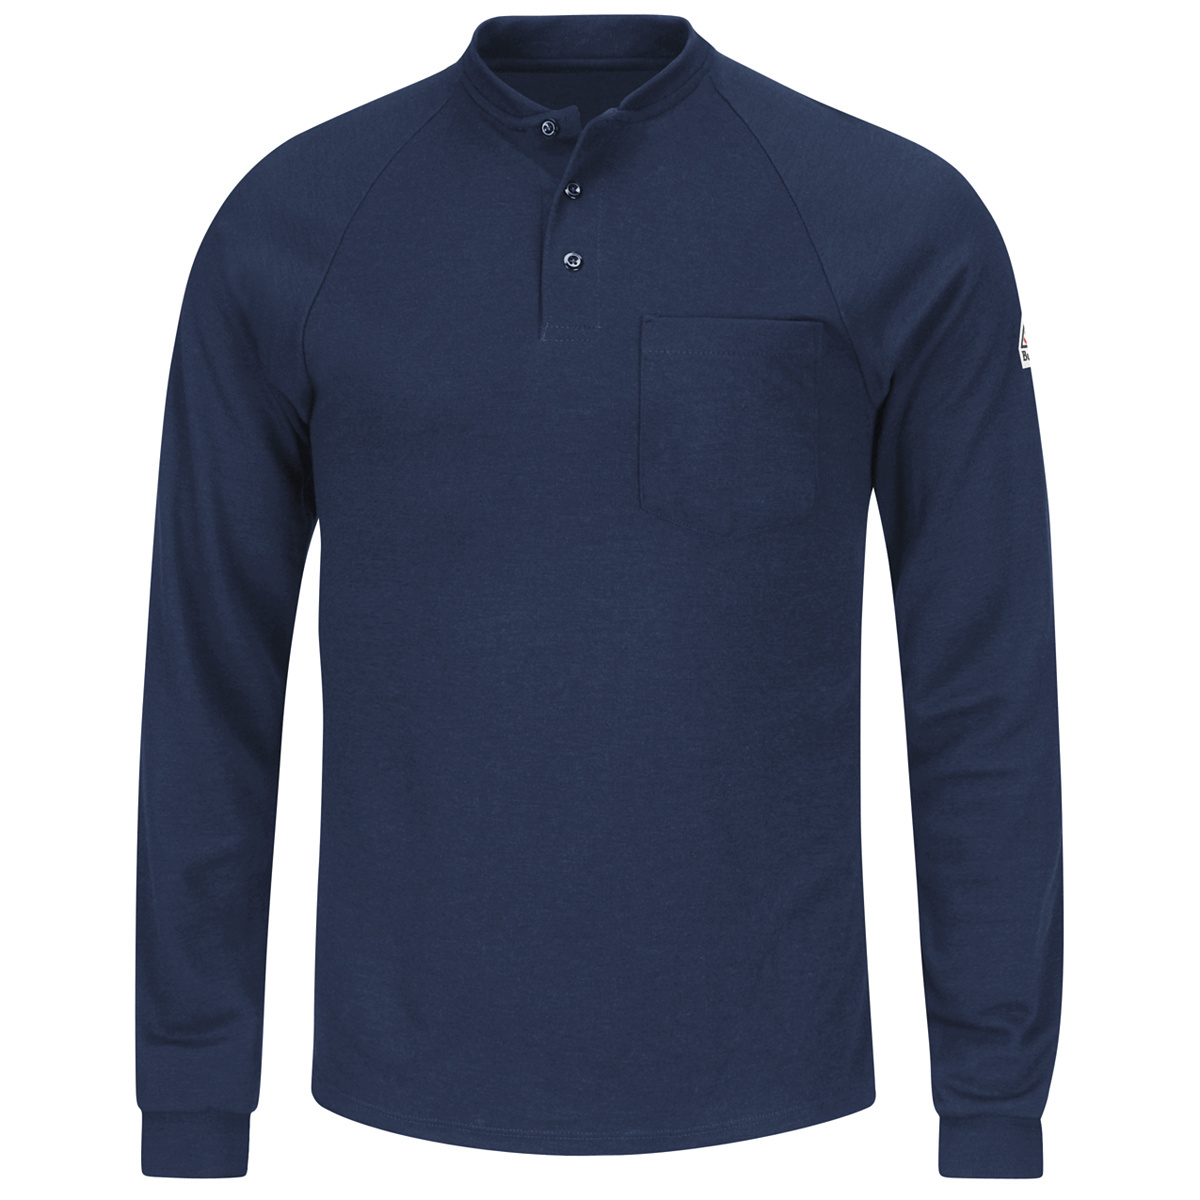 Bulwark® Large Regular Navy Blue Swiss Pique/Modacrylic/Lyocell/Aramid Flame Resistant Henley Shirt With Button Front Closure